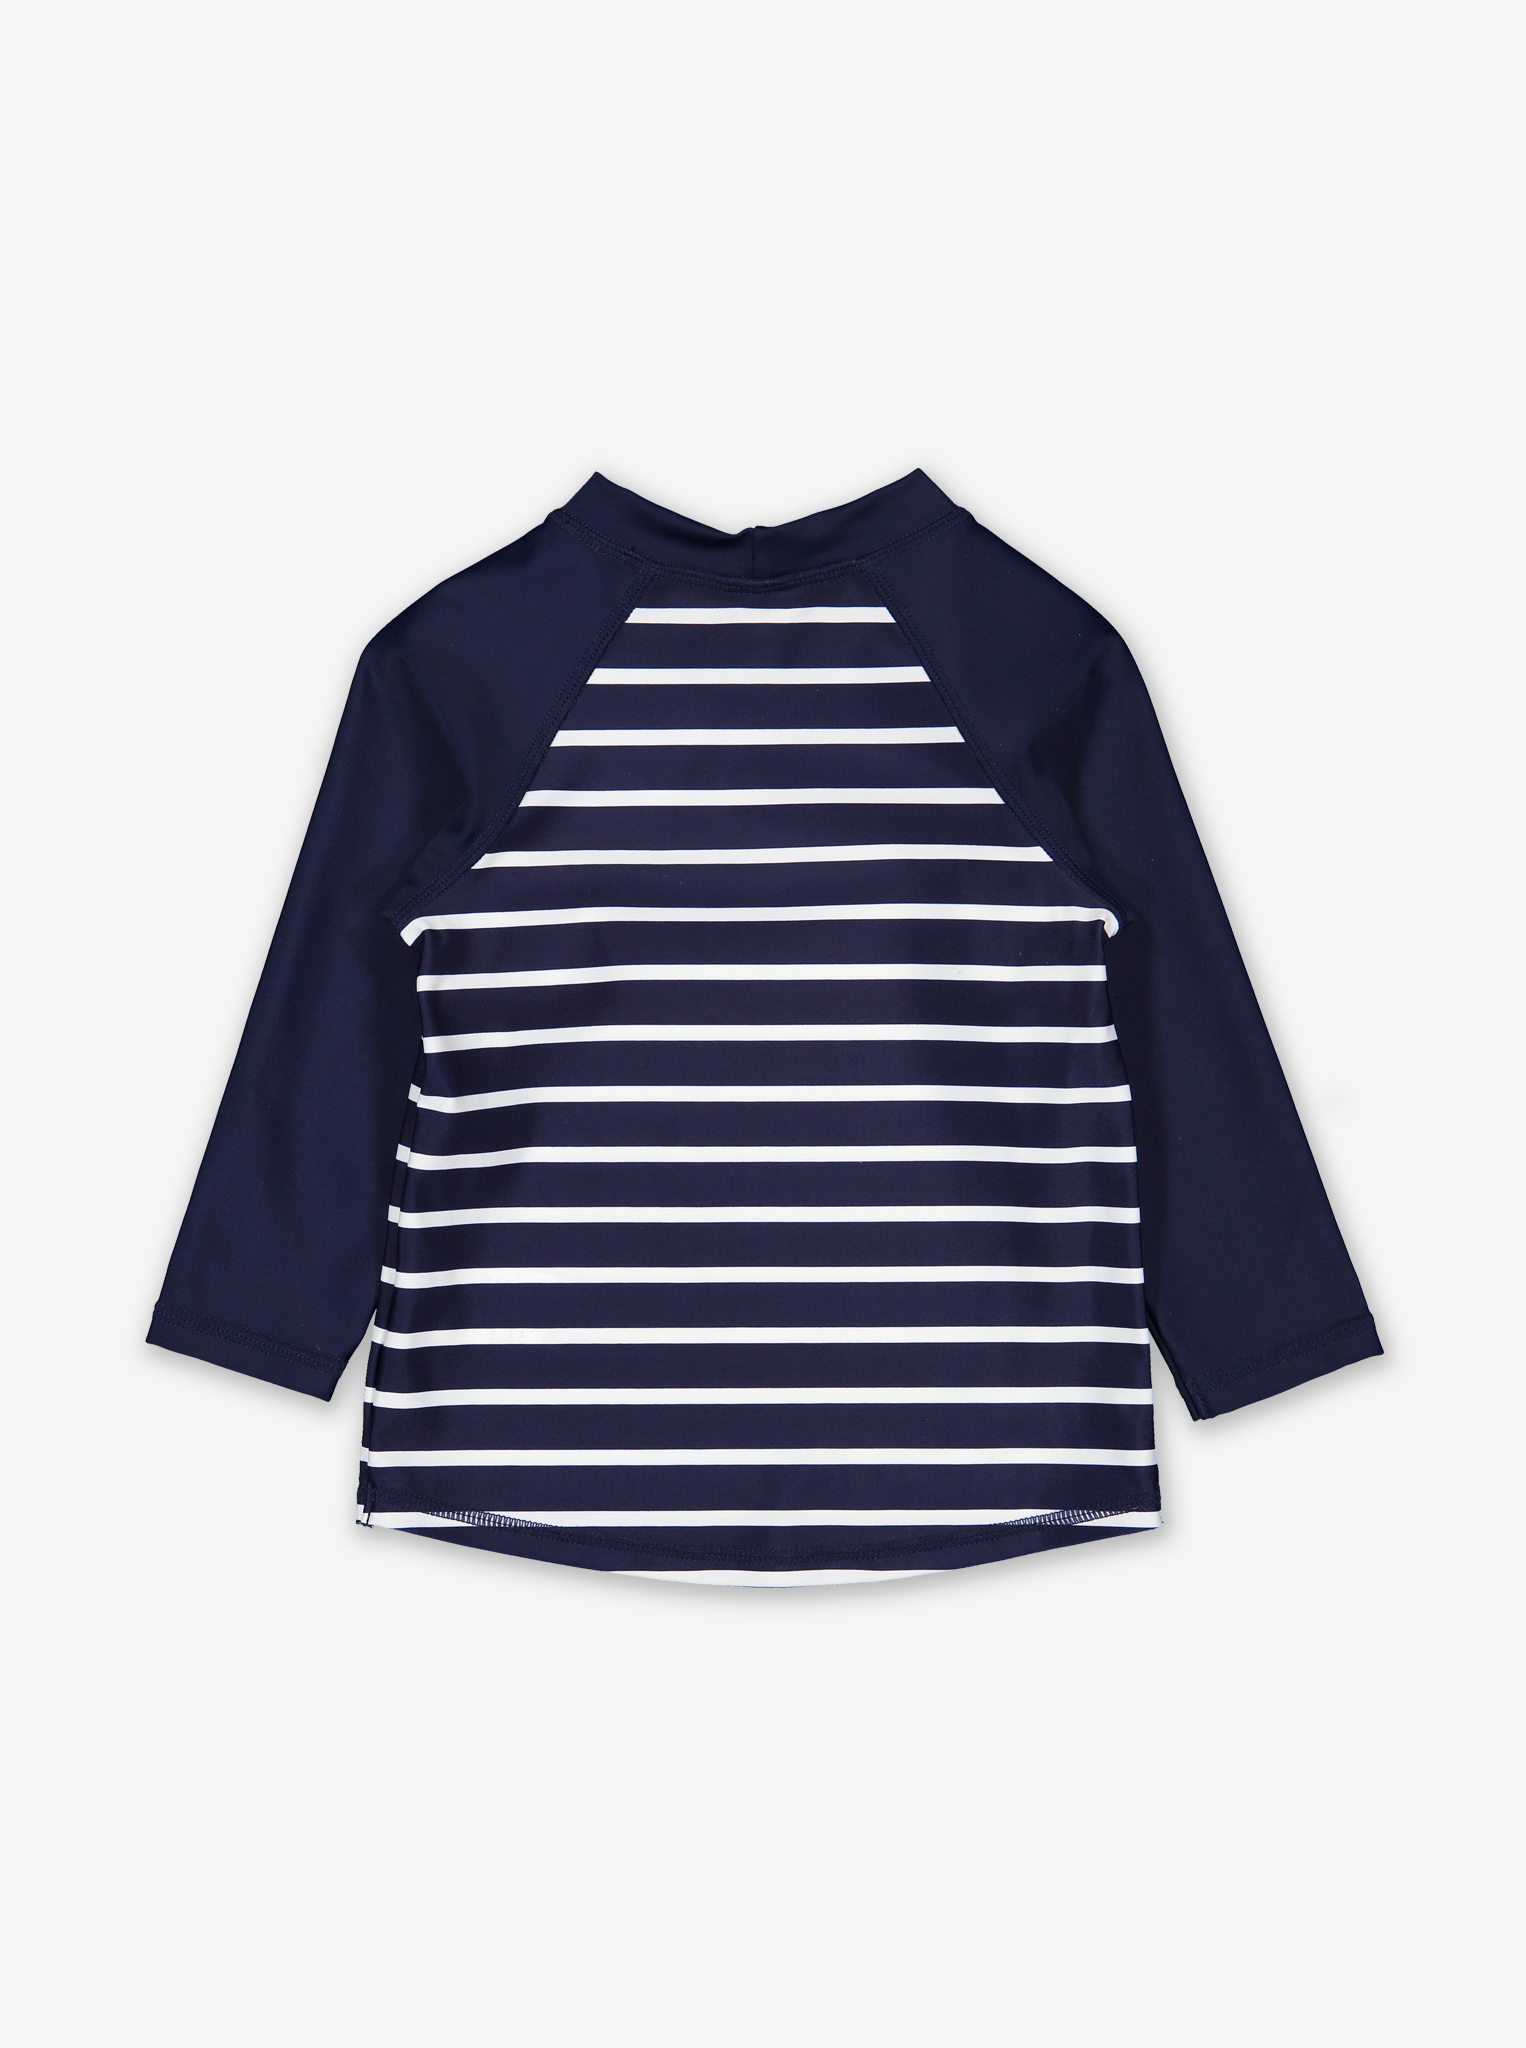 UPF 5UPF 50 navy coloured kids rash guard with long sleeves. Made with soft, UV protected fabric that is gentle on boys & girls skin.